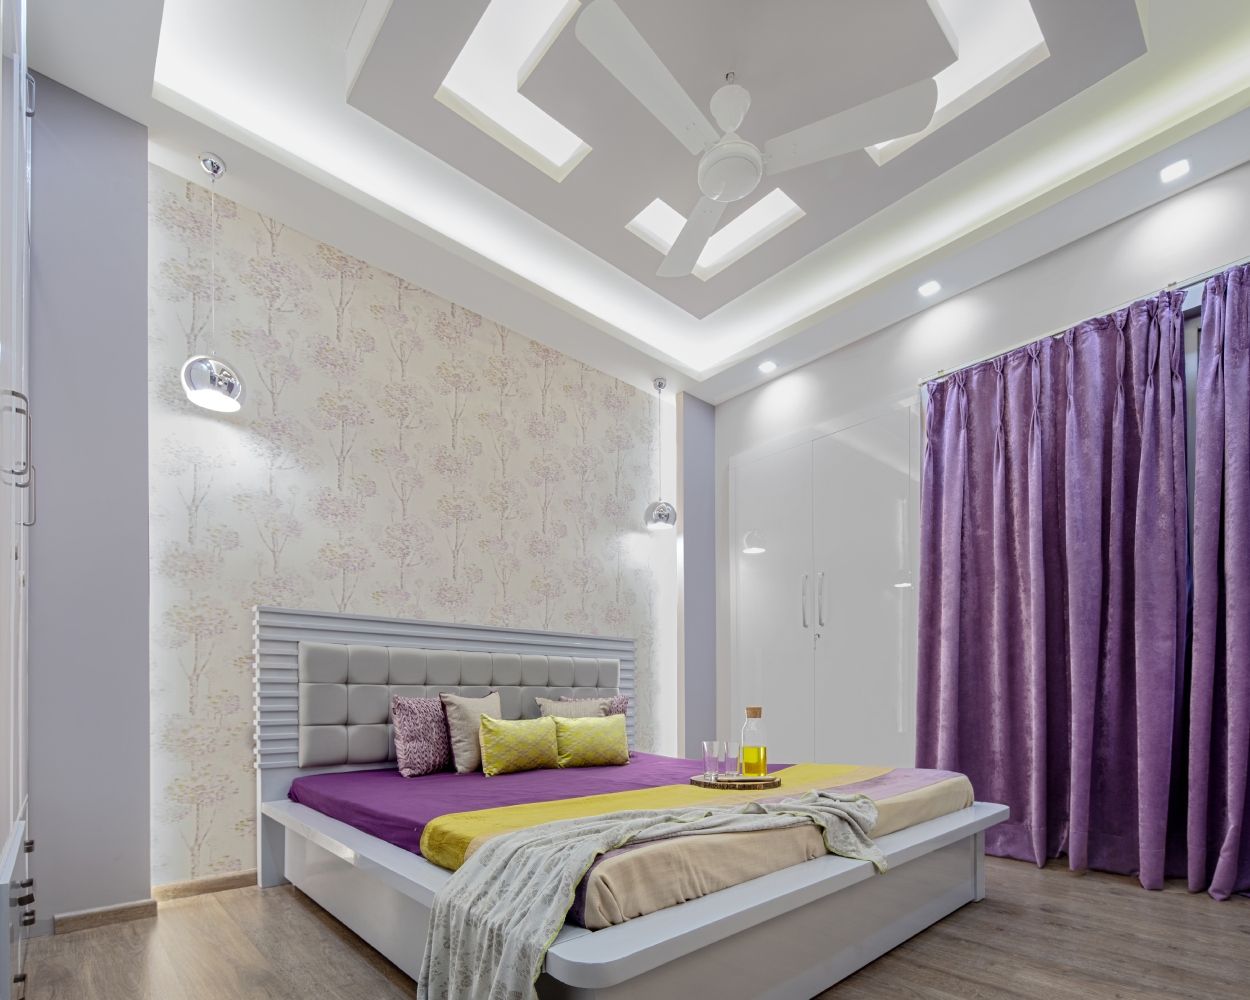 POP Ceiling Design With Recessed Lights | Livspace